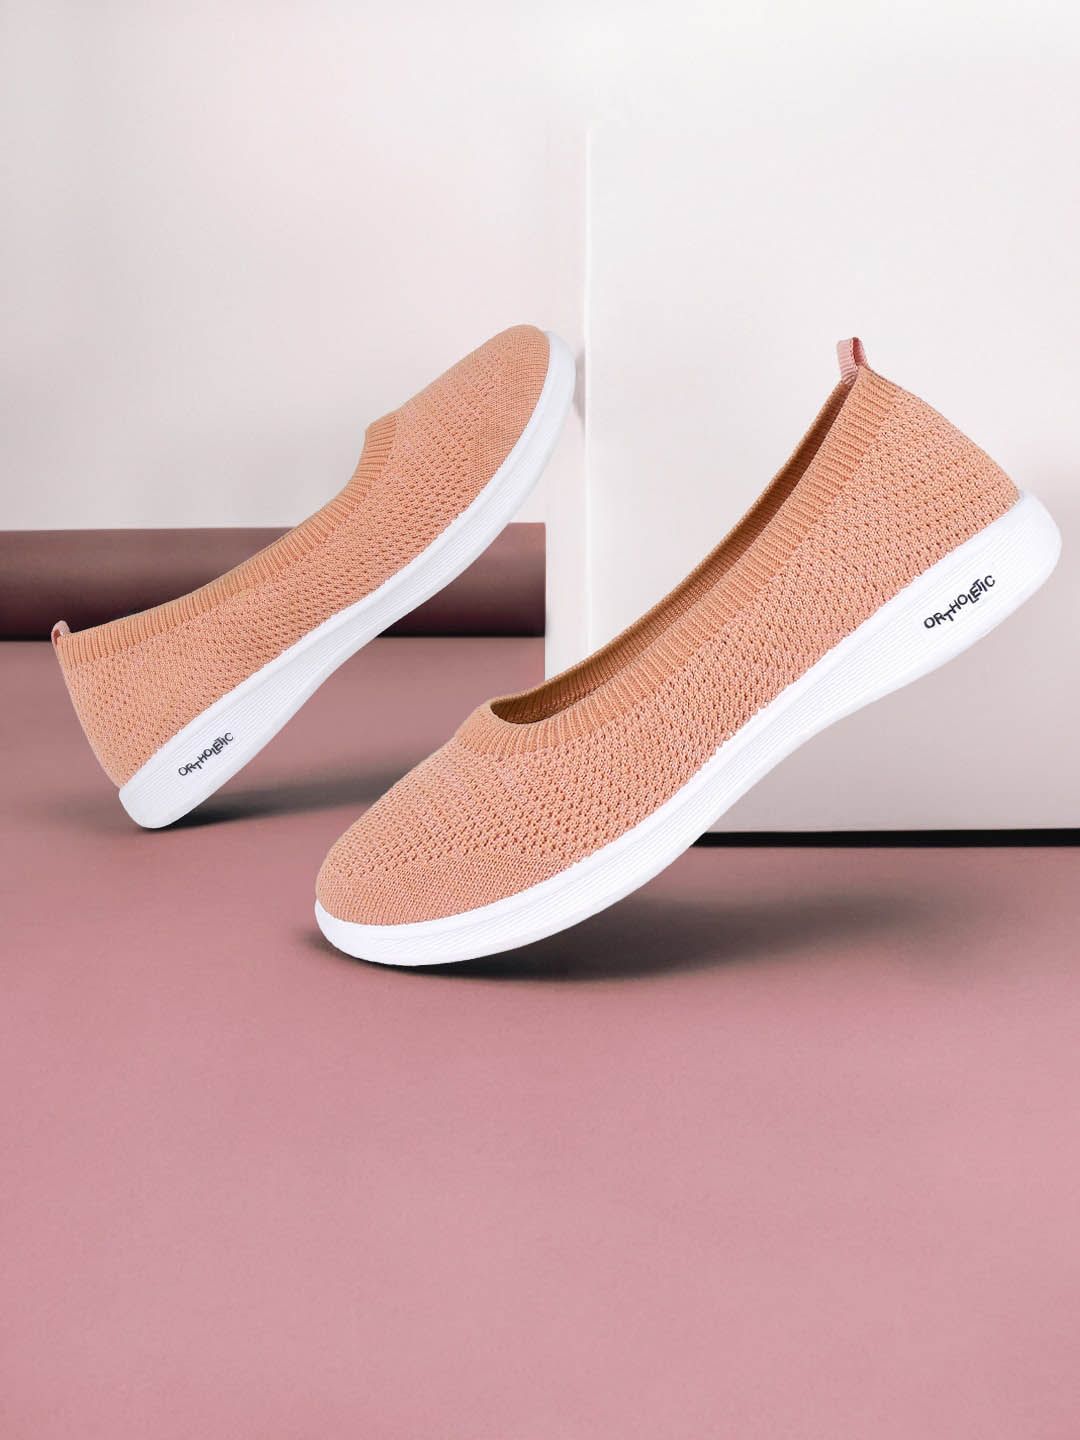 Champs Women Peach-Coloured Woven Design Slip-On Sneakers Price in India